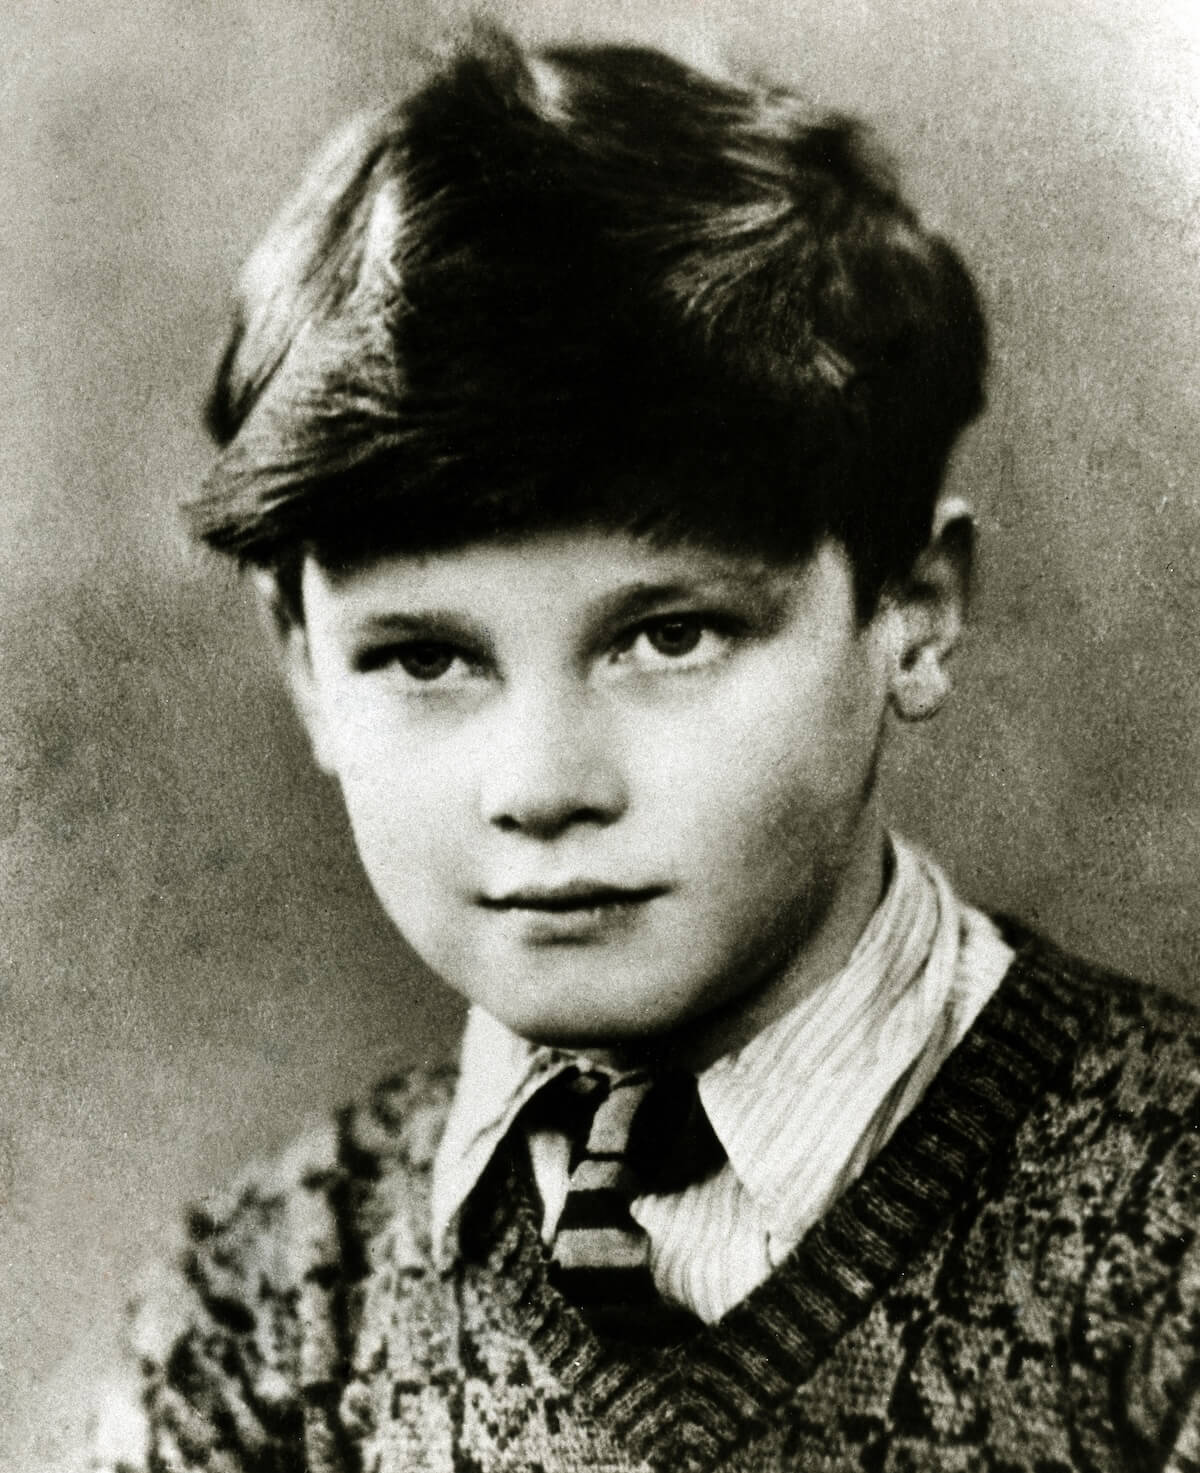 A young Roger. Moviestore Collection Ltd / Alamy Stock Photo.